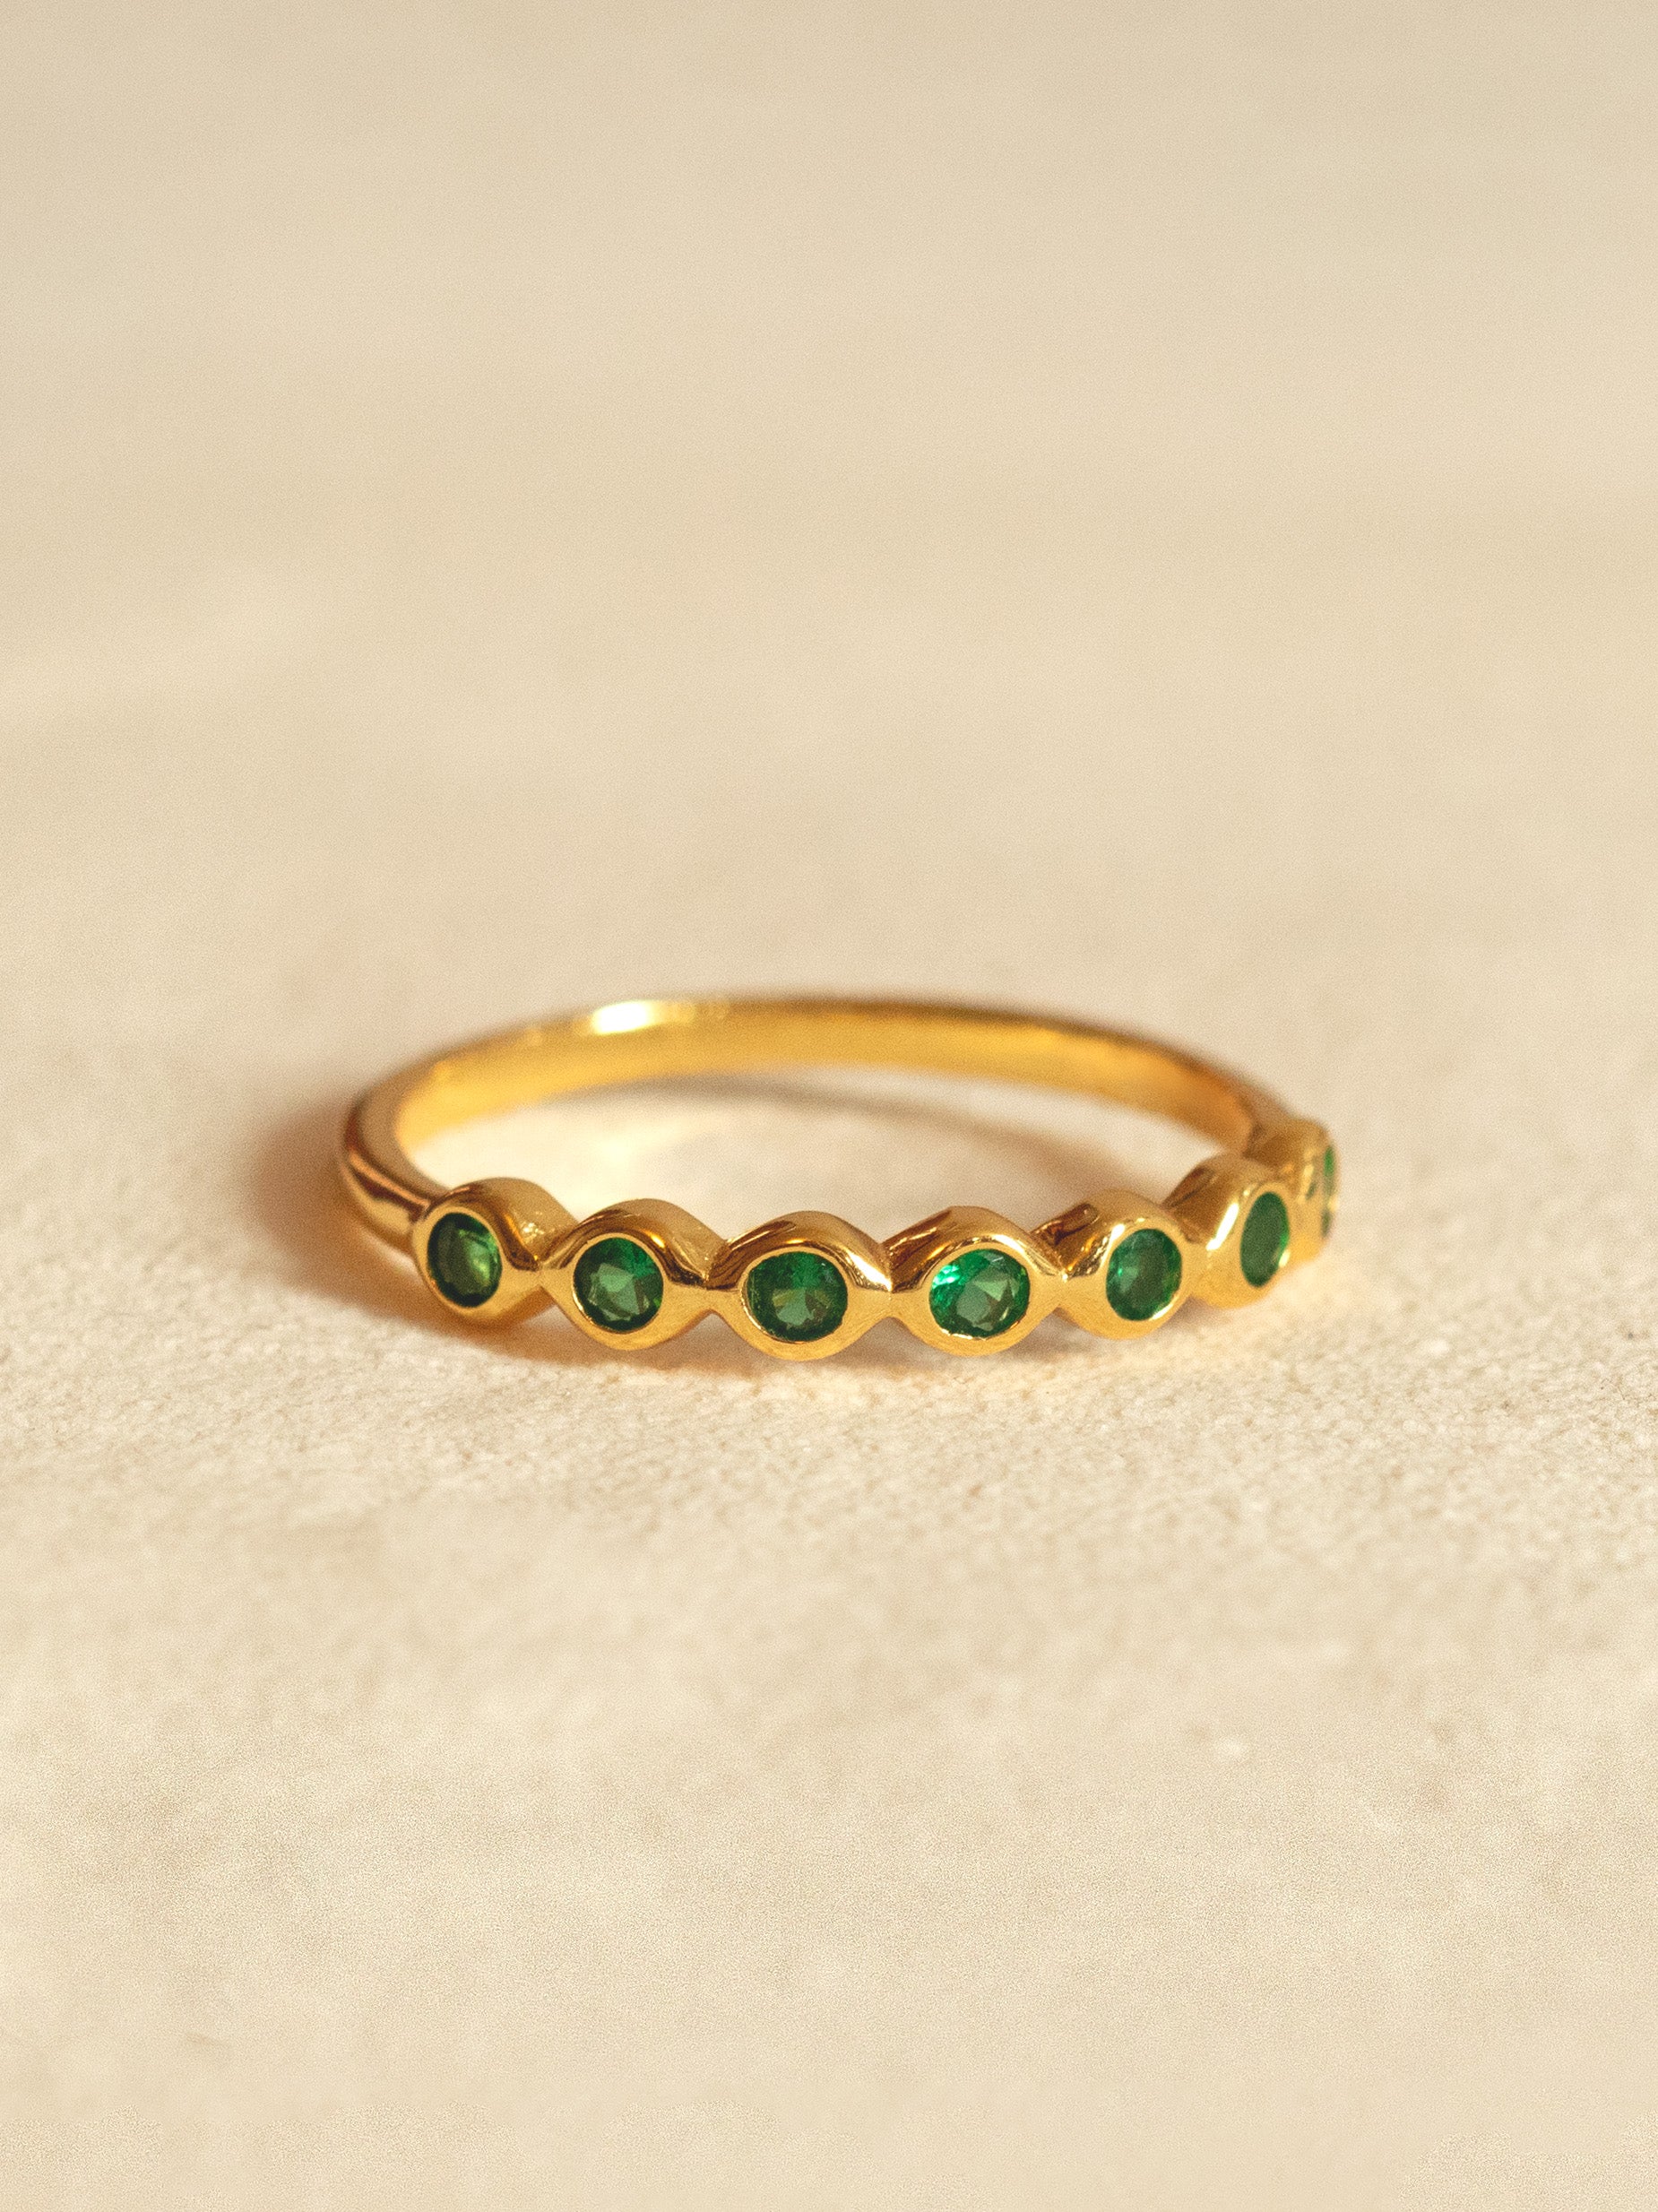 Gold Ring With Emerald Green Stones